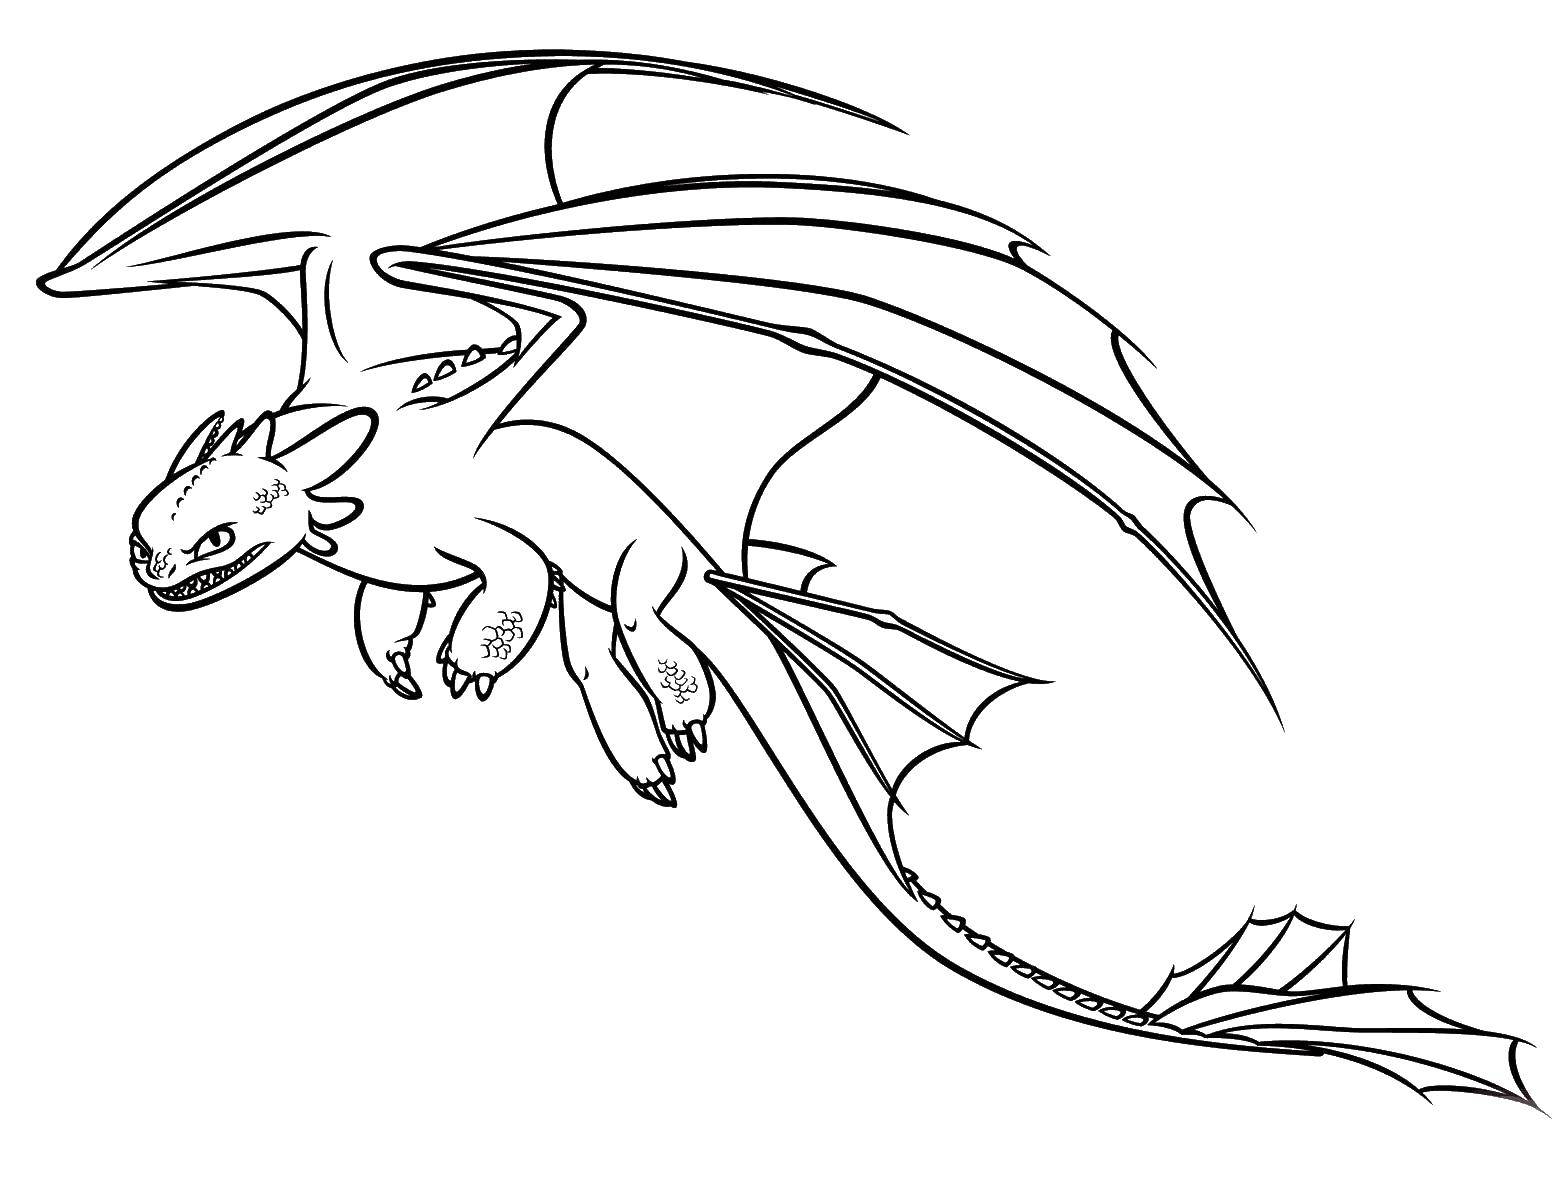 Coloring Dragon. Category Animals. Tags:  the dragon.